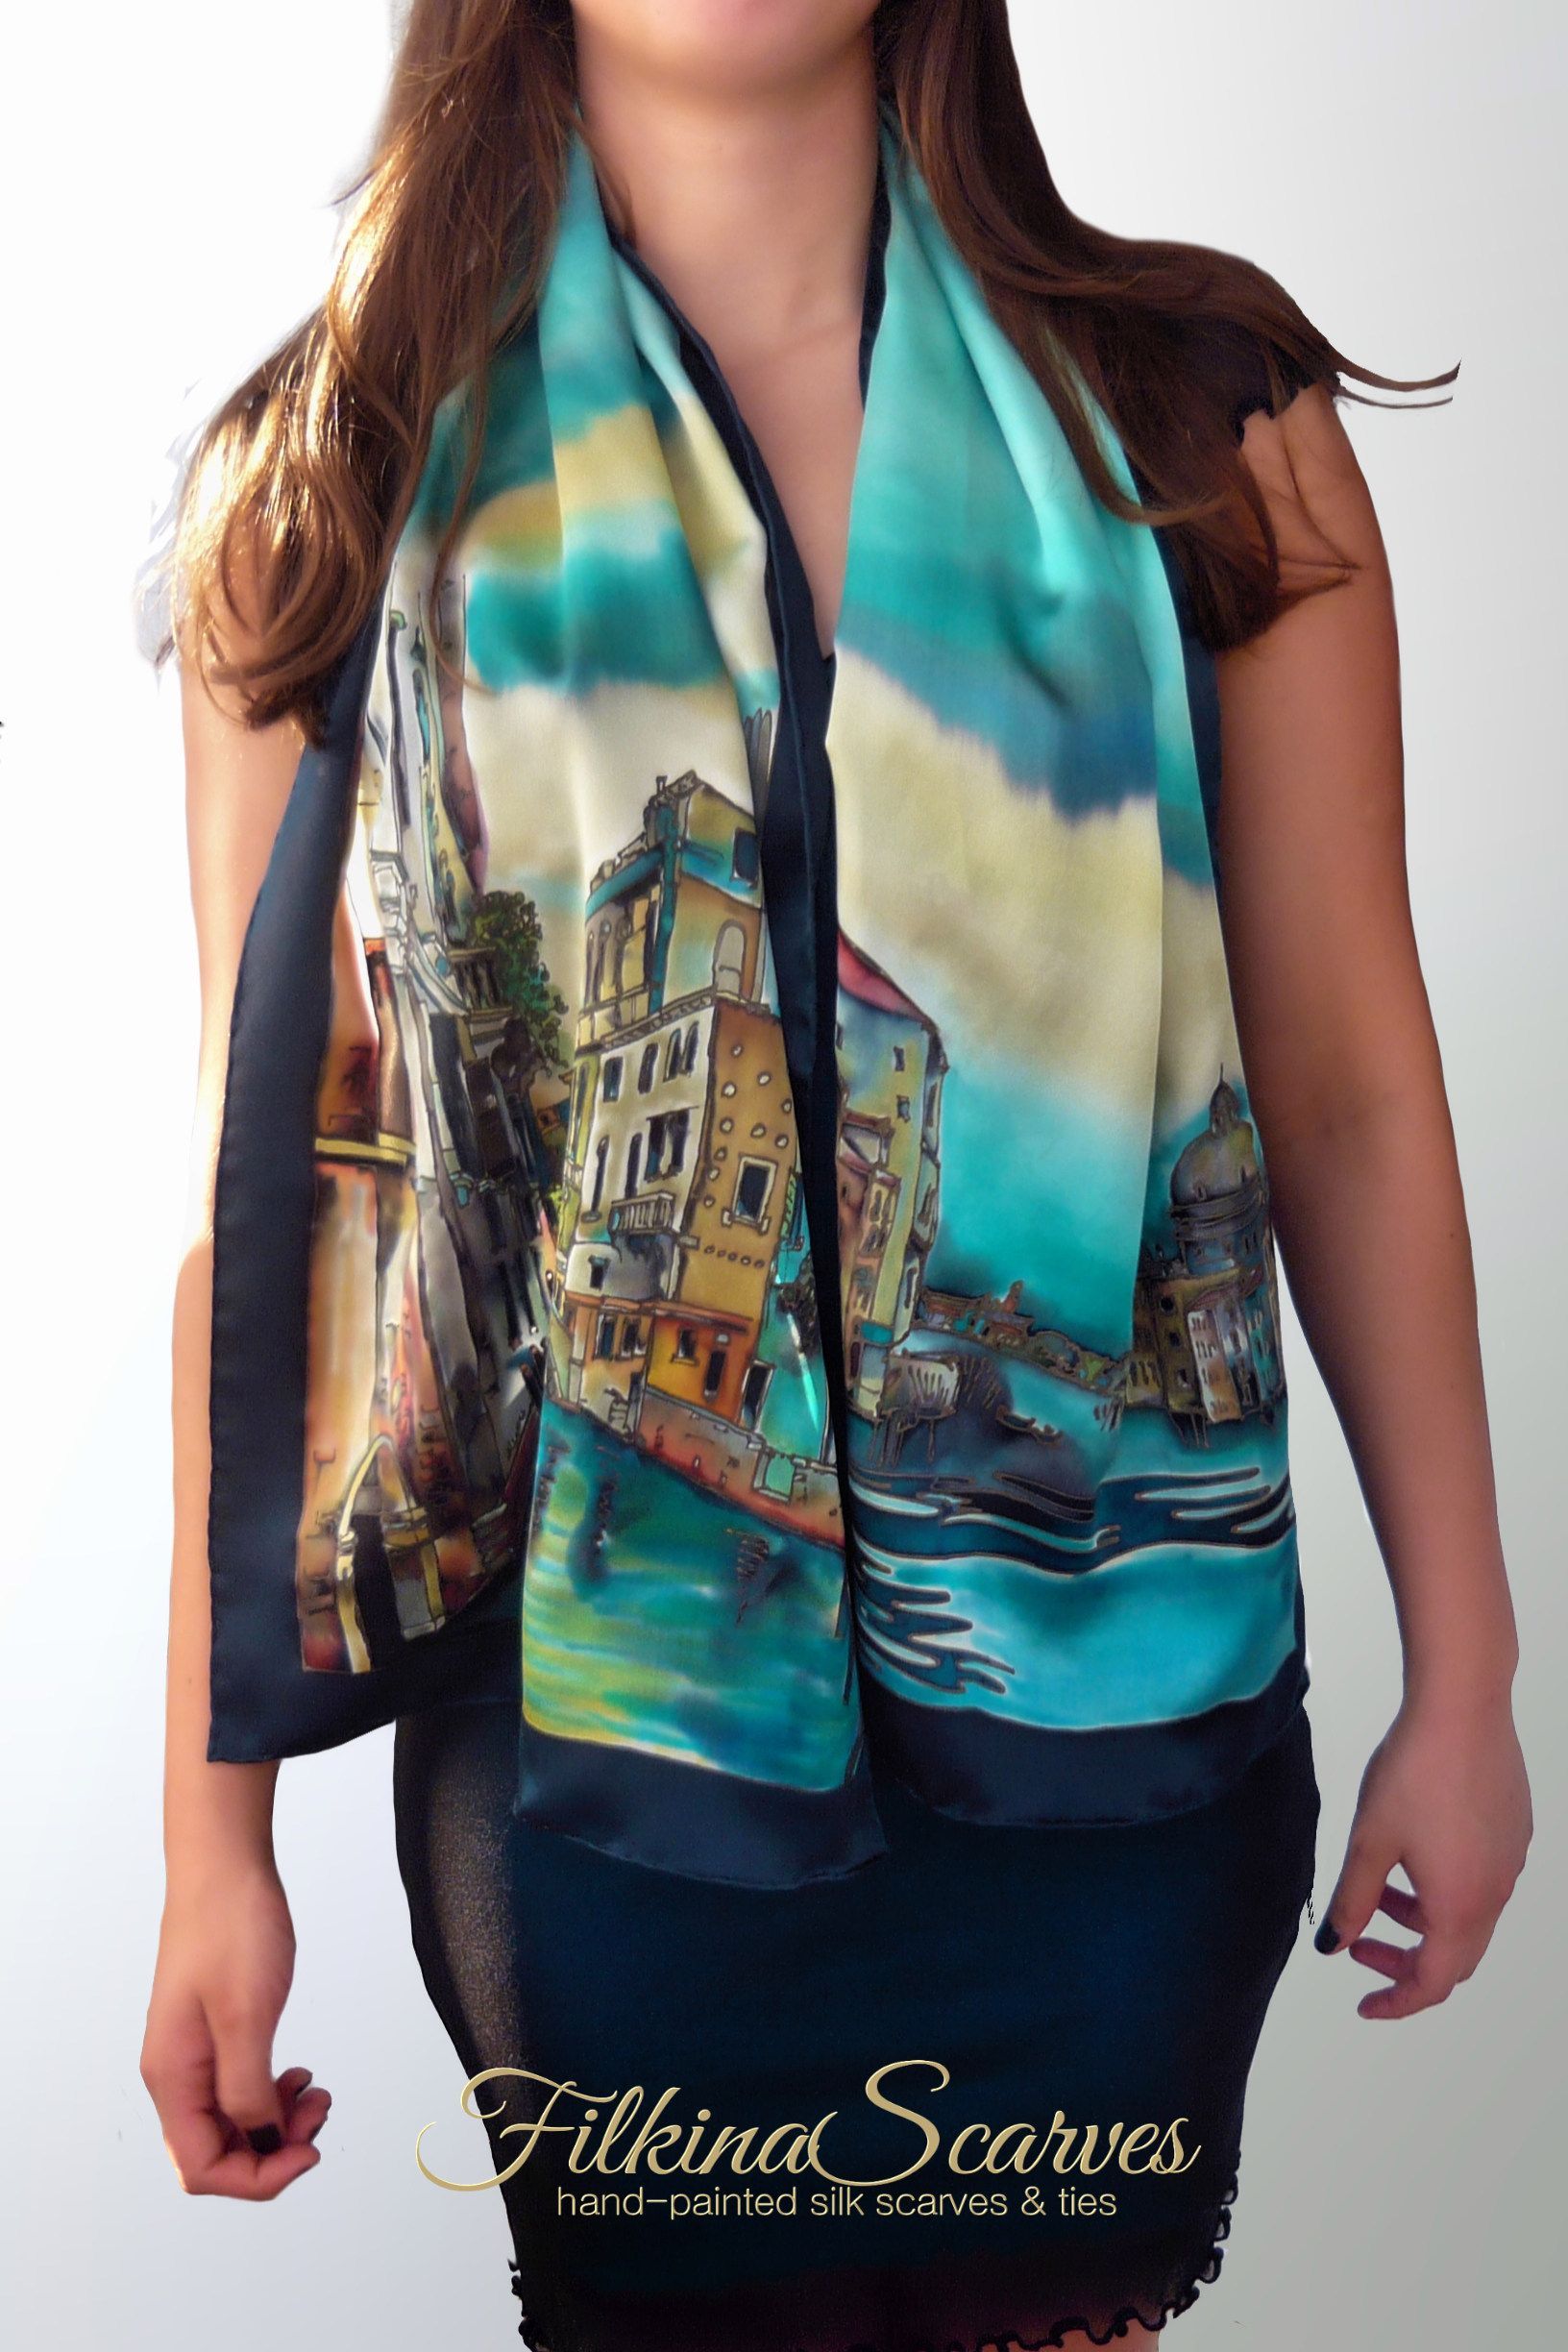 Silk Art. The Perfect Women's Gifts - Unique Hand-Painted Silk Scarves from FilkinaScarves - Venice -   15 dress Silk christmas gifts
 ideas